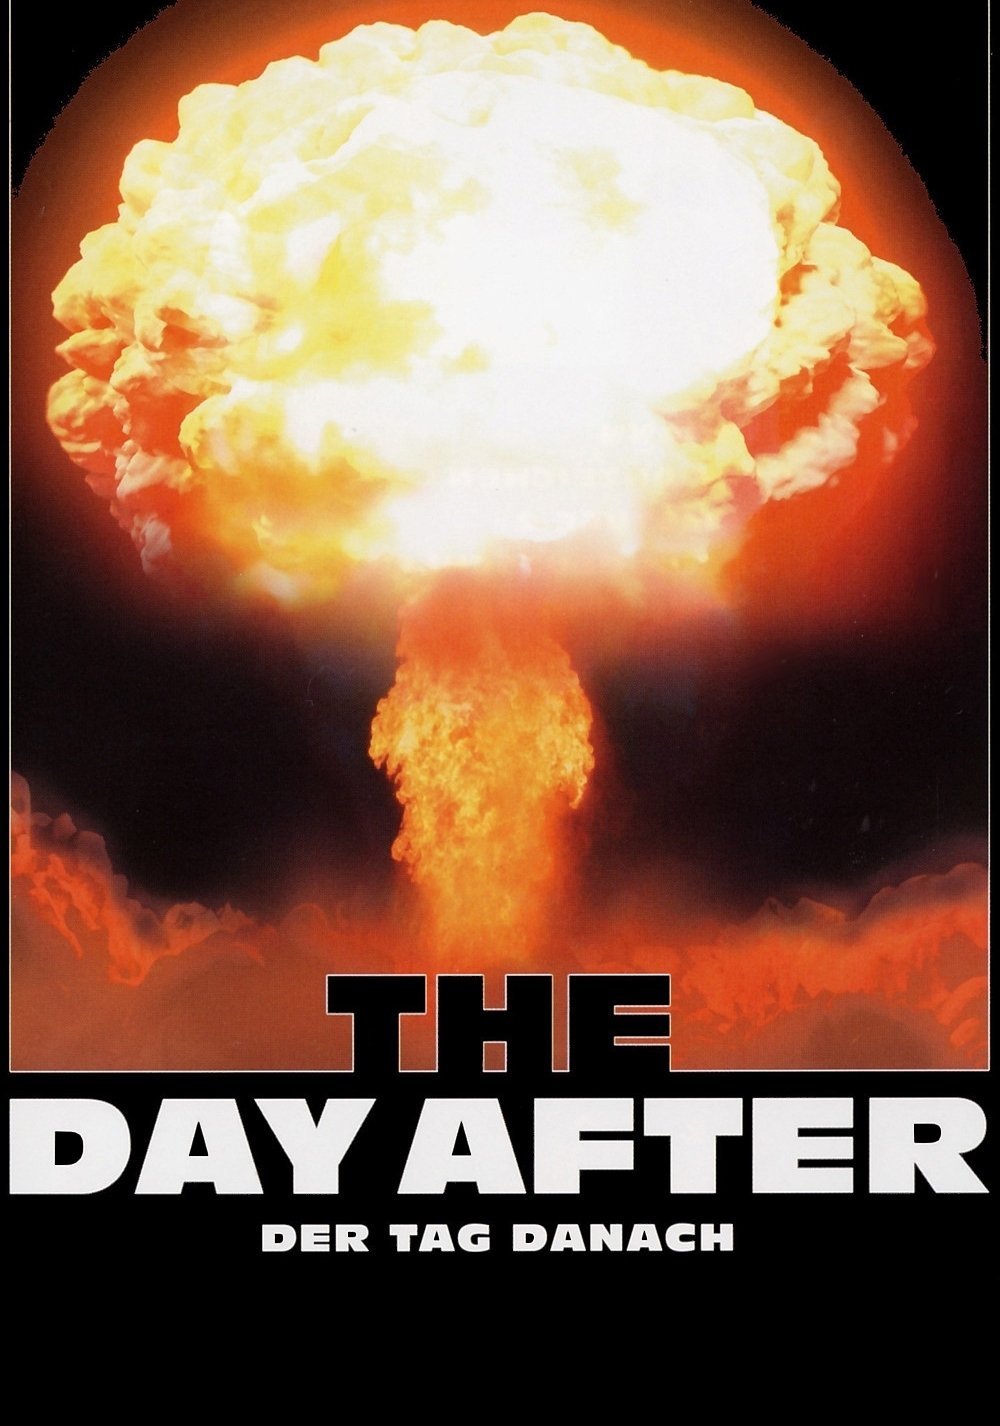 The Day After Movie Poster - ID: 134897 - Image Abyss